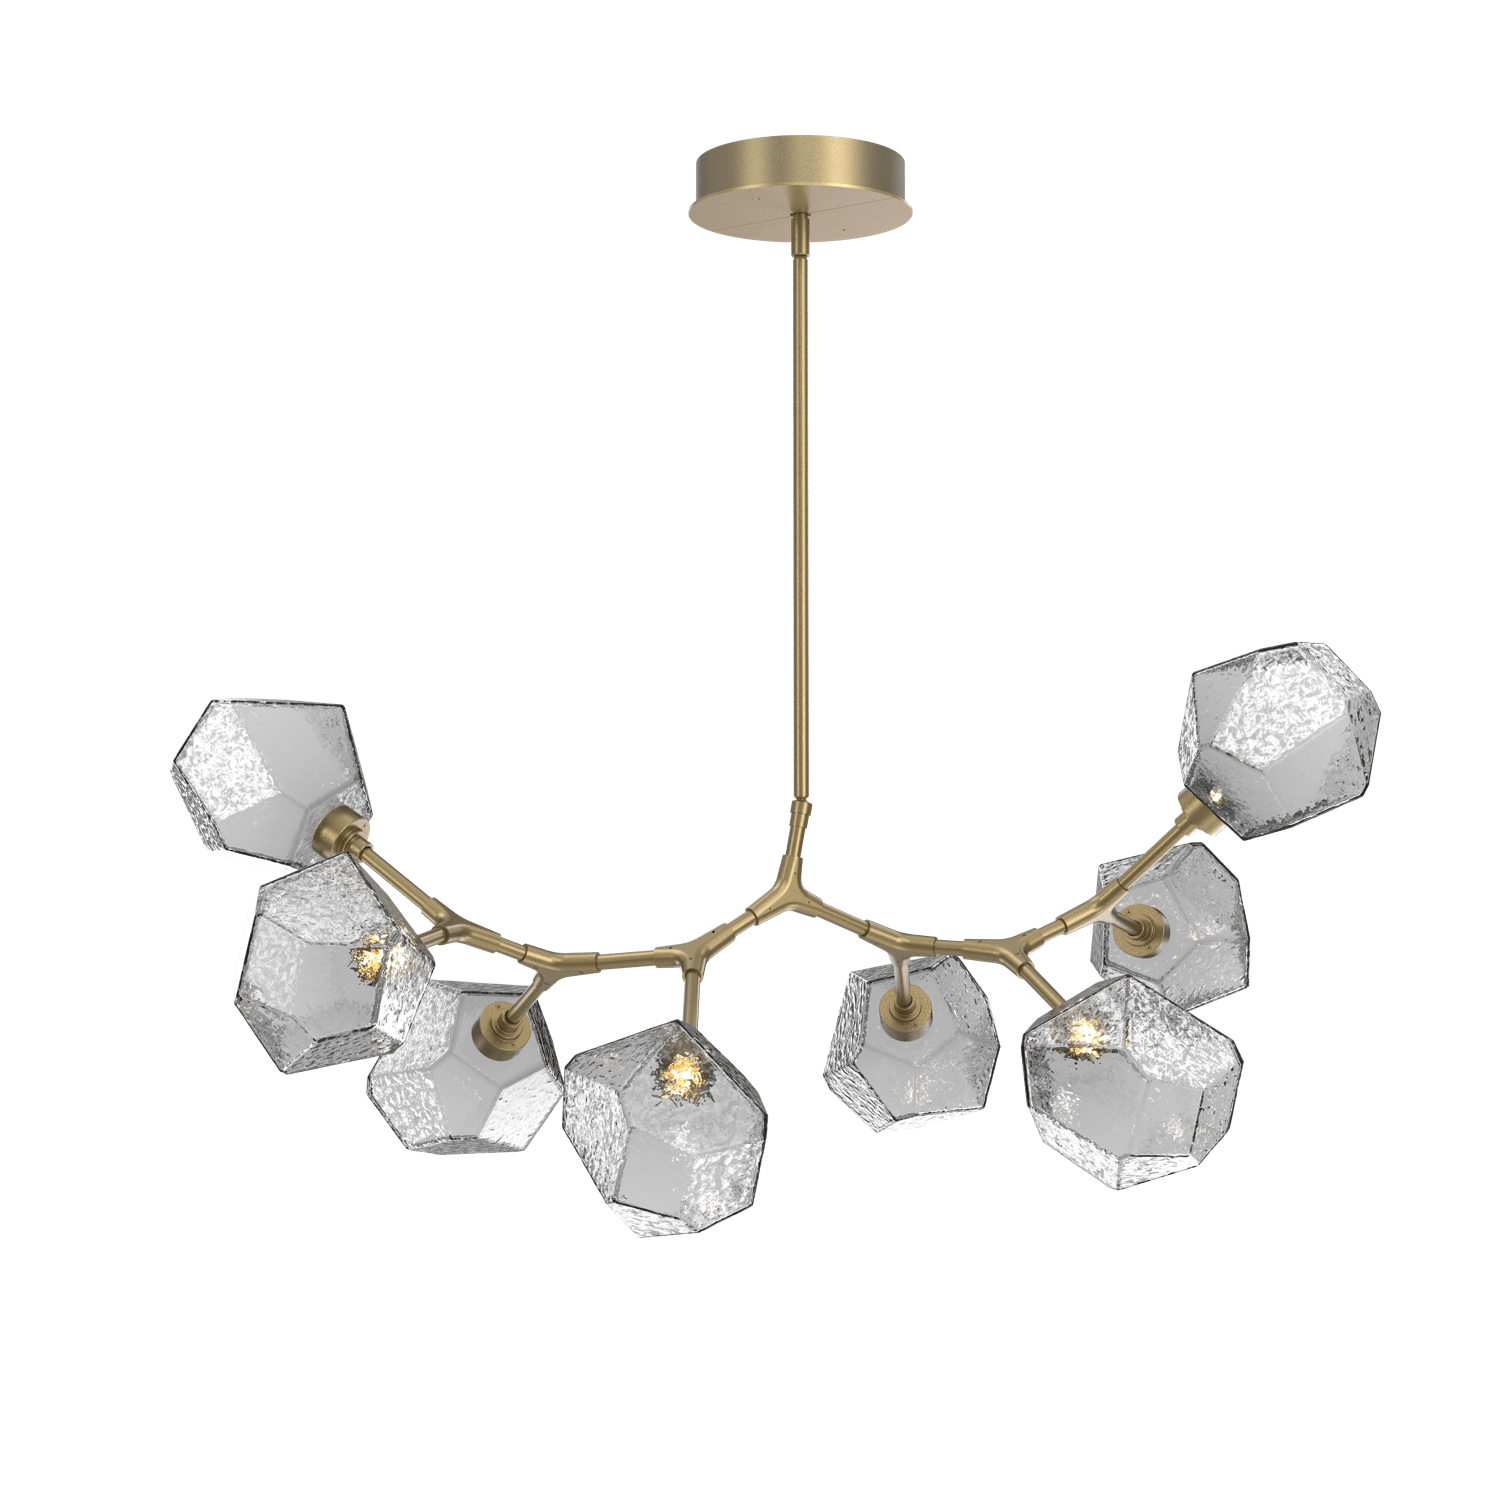 PLB0039-BB-GB-S-Hammerton-Studio-Gem-8-light-modern-branch-chandelier-with-gilded-brass-finish-and-smoke-blown-glass-shades-and-LED-lamping